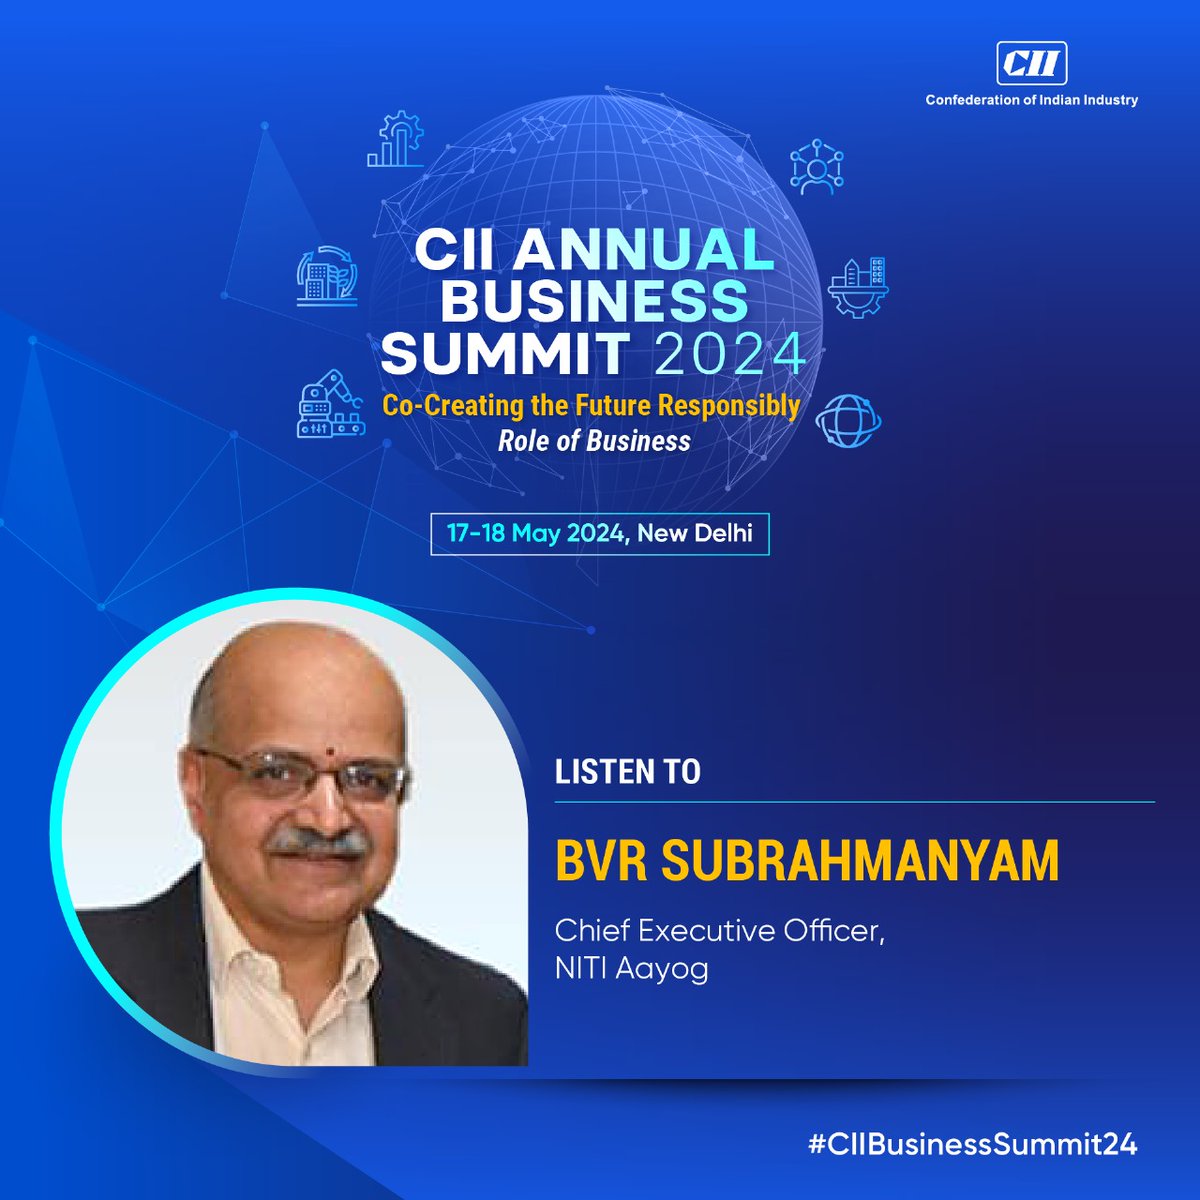 Listen to BVR Subrahmanyam, Chief Executive Officer, @NITIAayog share views at the CII Annual Business Summit 2024! Government dignitaries, industry captains, entrepreneurs, influencers, startups & thought leaders get together to deliberate on the way ahead for India. Join the